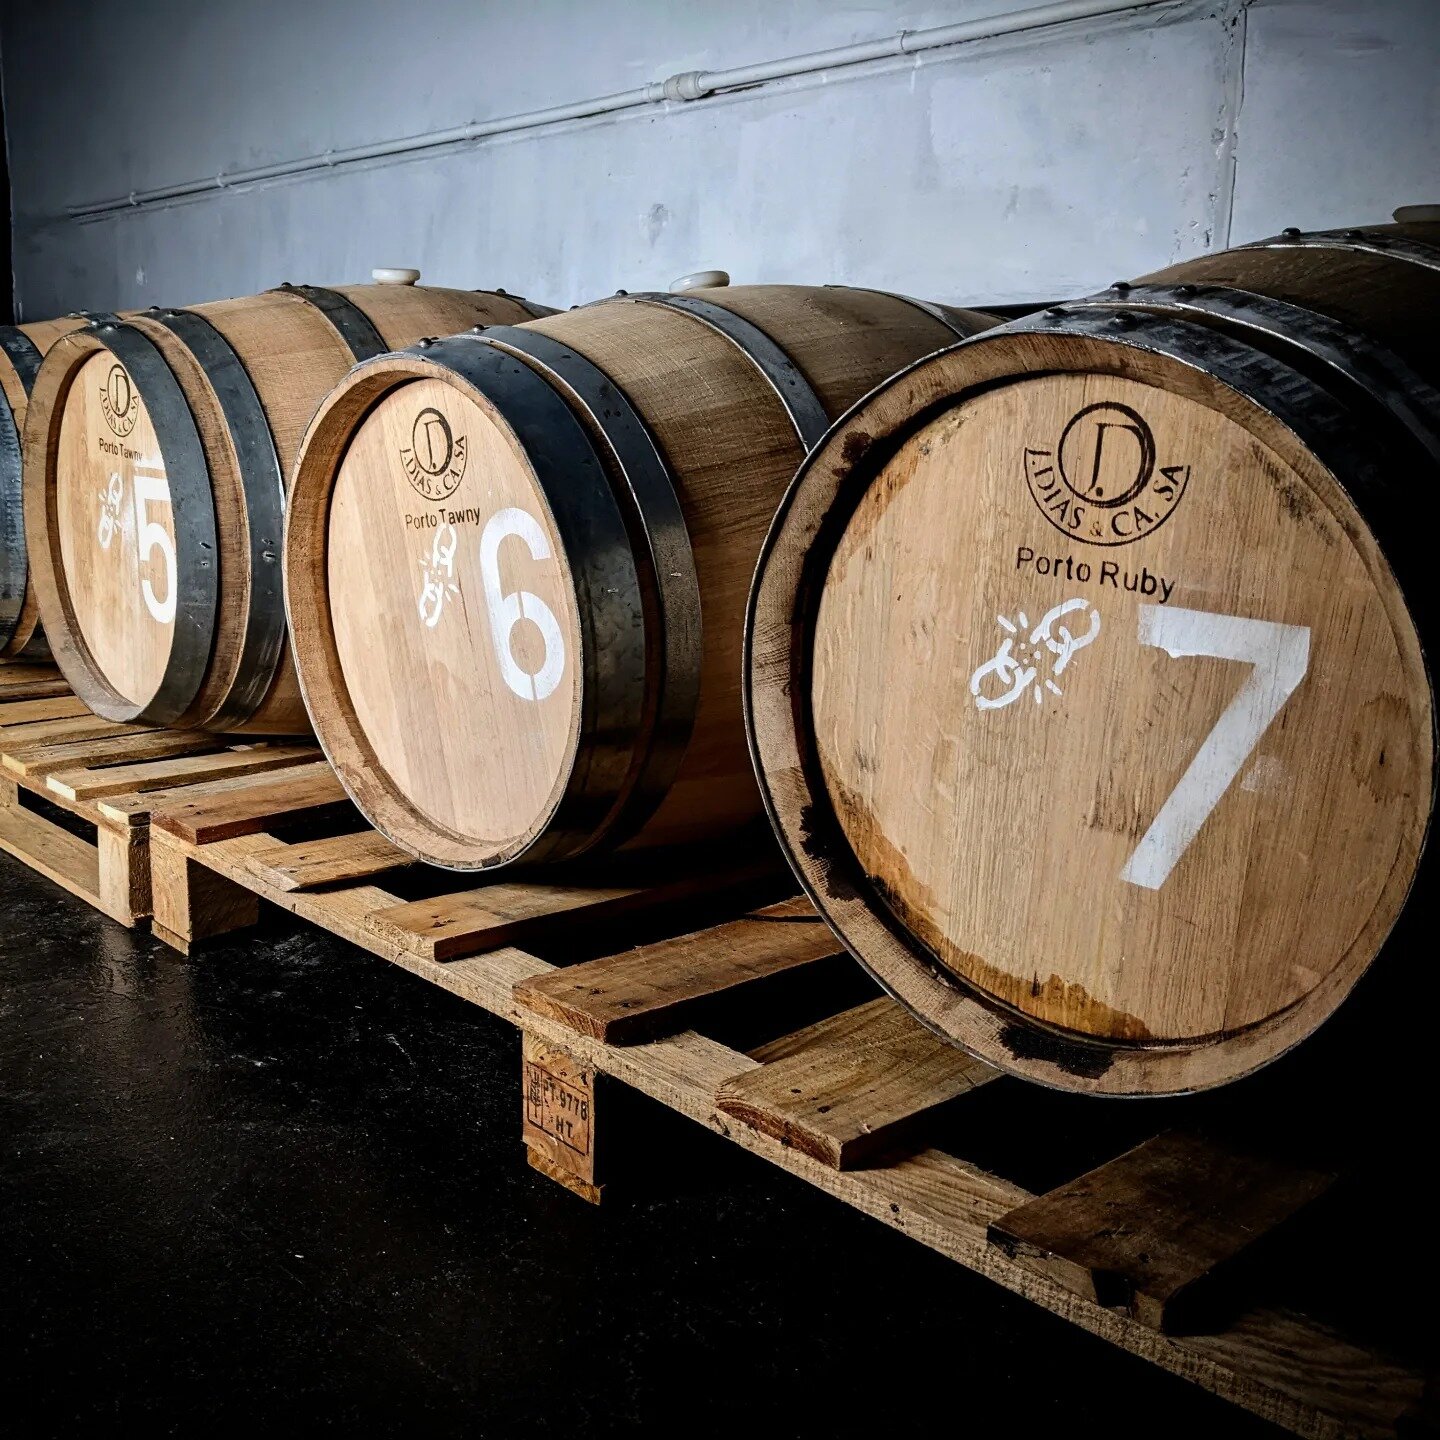 After several marathon distillations over the last few days,  we finally made enough rum to fill four 100-liter casks.

The rum has now begun its graceful aging in these ex Tawny and Ruby Port casks, sourced from the renowned J.Dias cooperage in Port